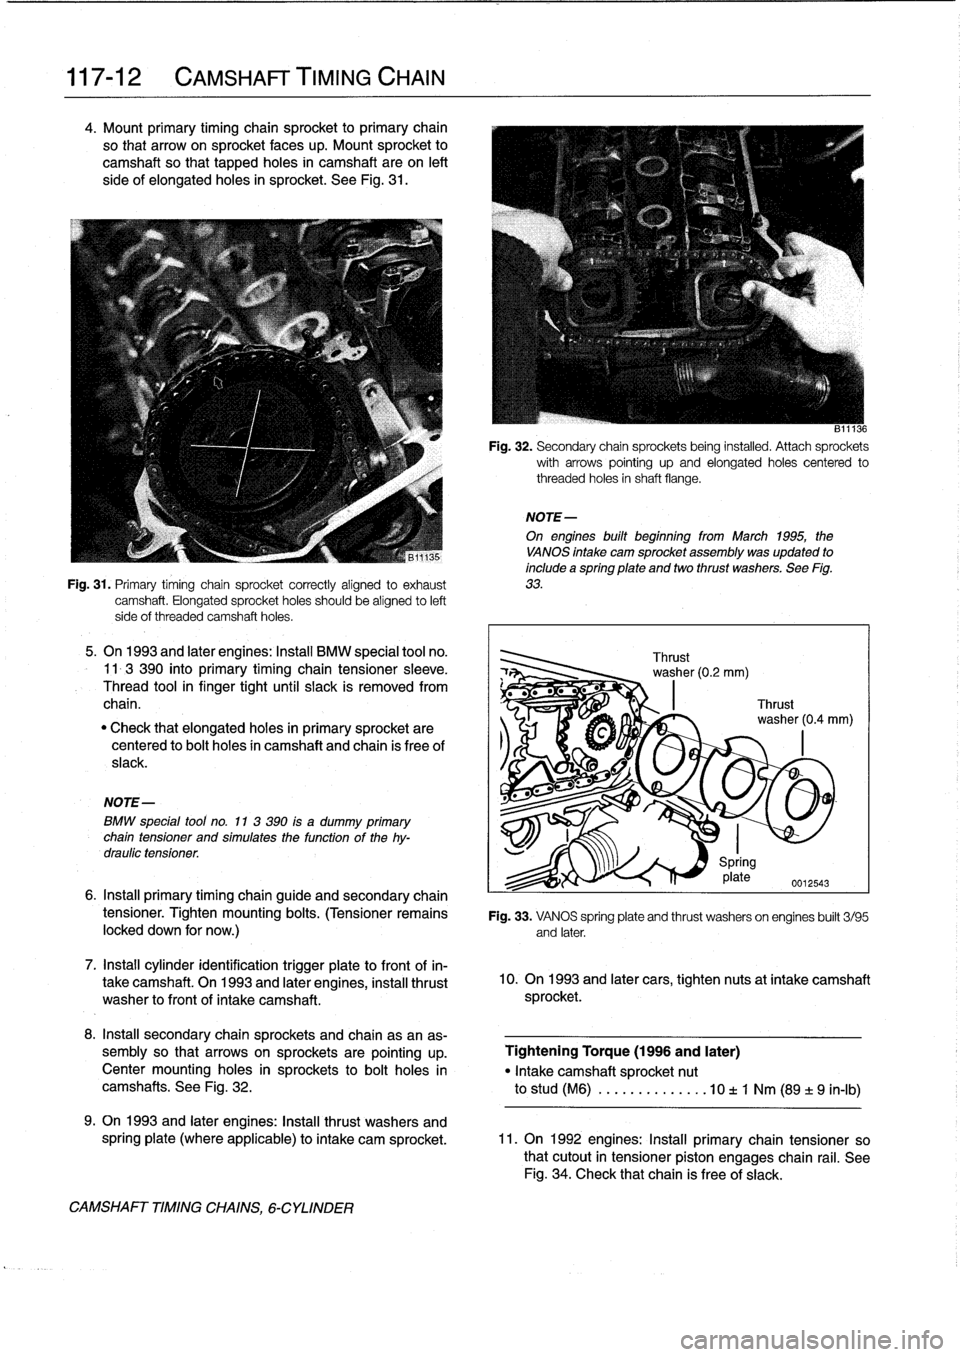 BMW M3 1993 E36 Service Manual 
117-
1
2

	

CAMSHAFT
TIMING
CHAIN

4
.
Mount
primary
timing
chain
sprocket
to
primary
chain

so
that
arrowon
sprocket
faces
up
.
Mount
sprocket
to

camshaftso
that
tapped
holes
in
camshaftare
on
lef